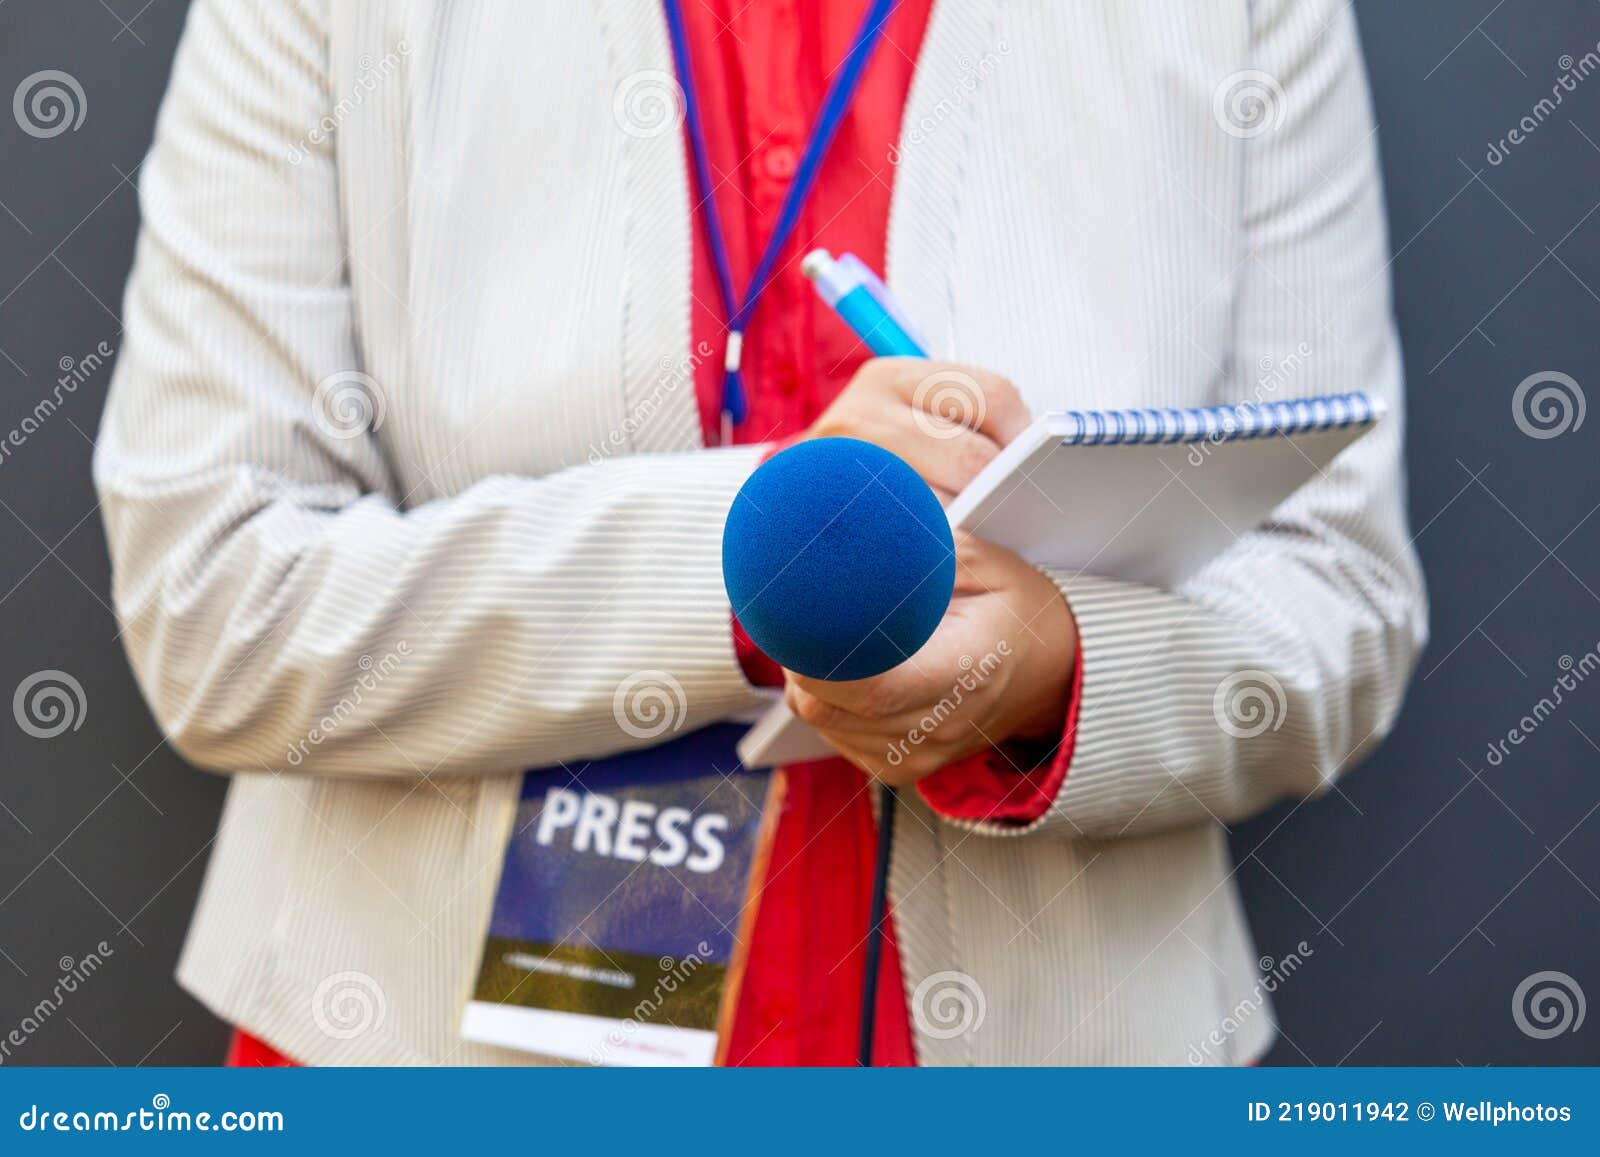 female journalist or reporter at news conference or media event. journalism concept.